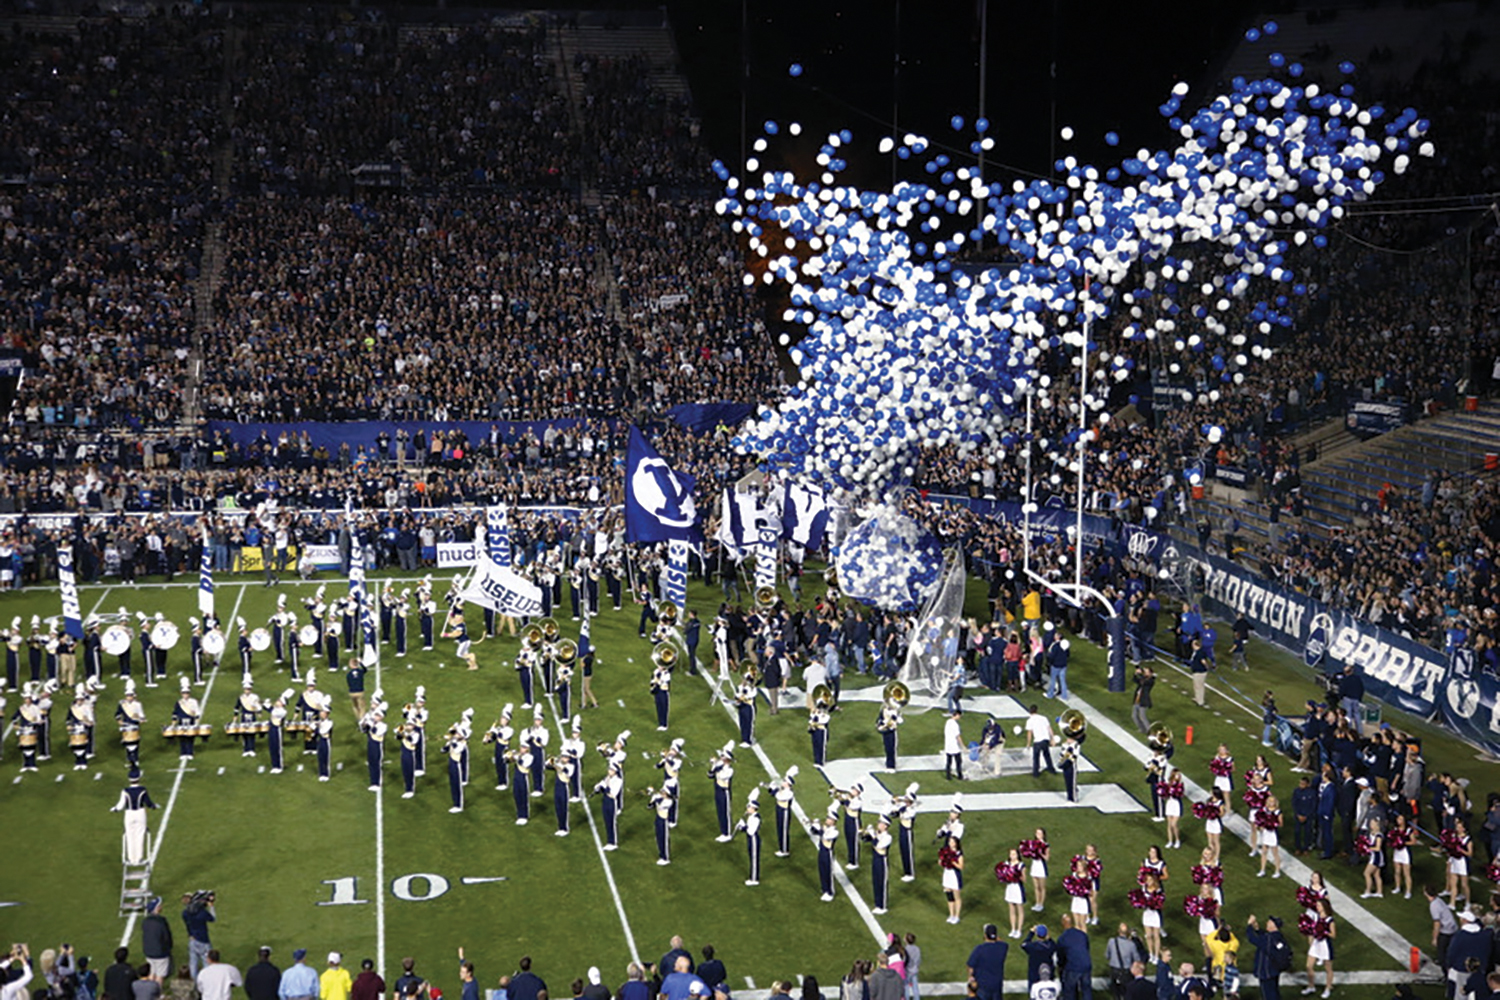 The band plays and thousands of balloons lift into the air as the BYU football team emerges from the tunnel.